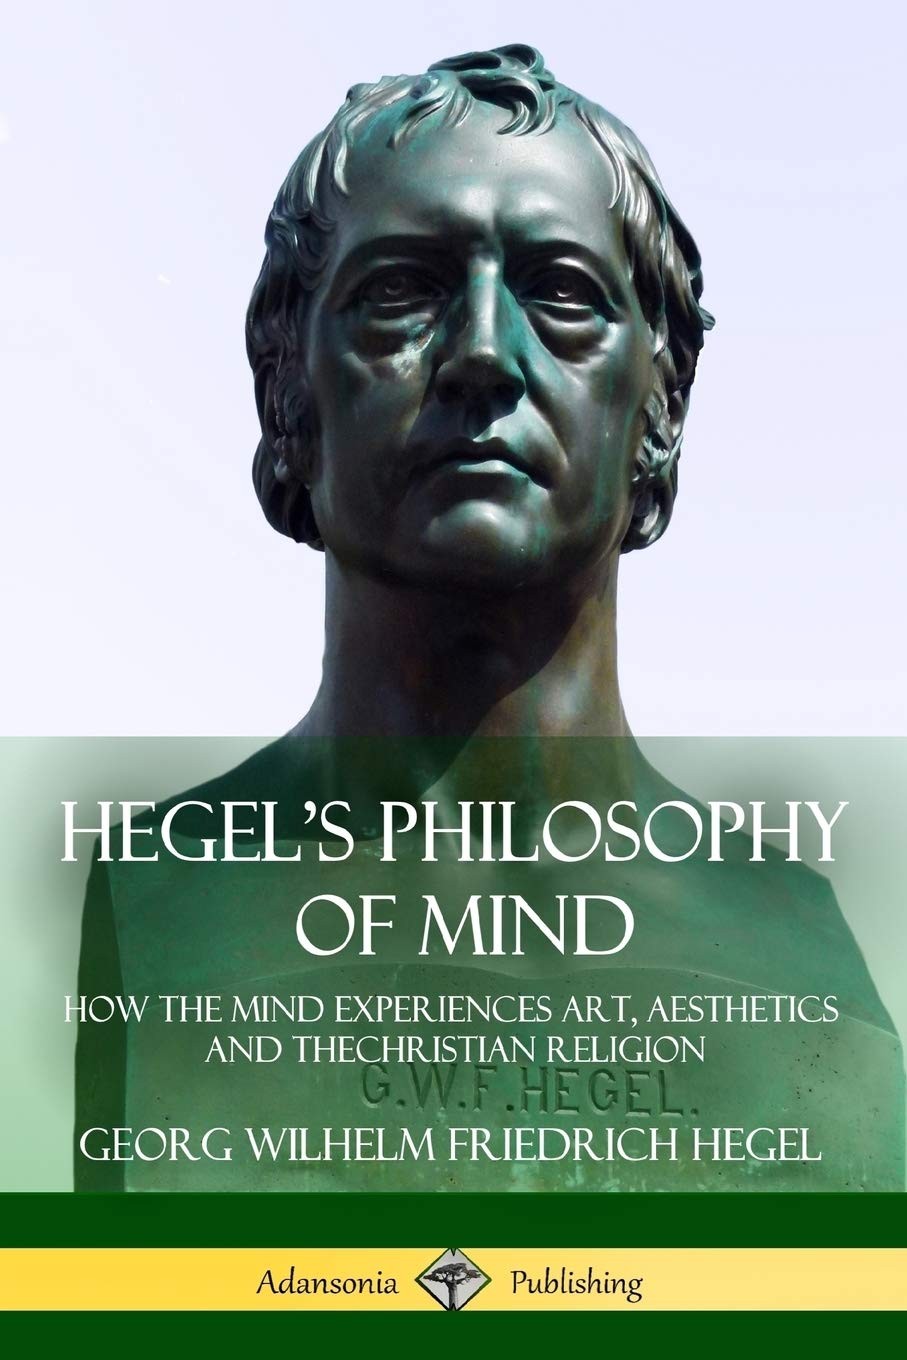 Hegel's Philosophy of Mind: How the Mind Experiences Art, Aesthetics and the Christian Religion (Hardcover)